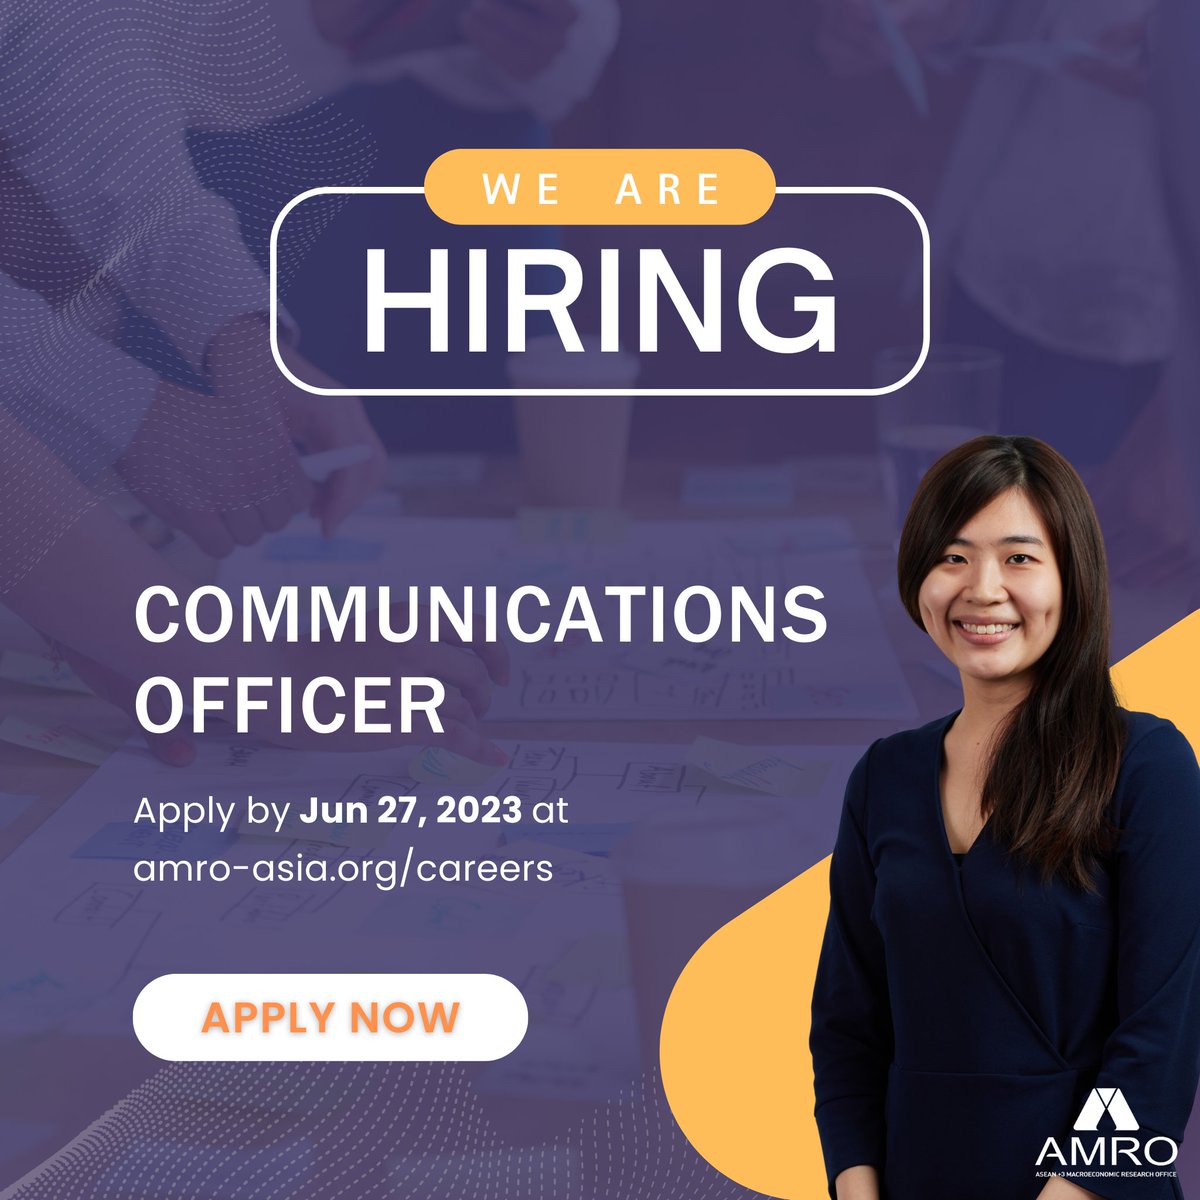 📣 #WorkWithUs If you are a seasoned communications professional with experience in #media relations and #outreach campaigns, join us on our mission in contributing to the macroeconomic and financial resilience and stability in #ASEANplus3

➡️ Apply at amro-asia.org/careers